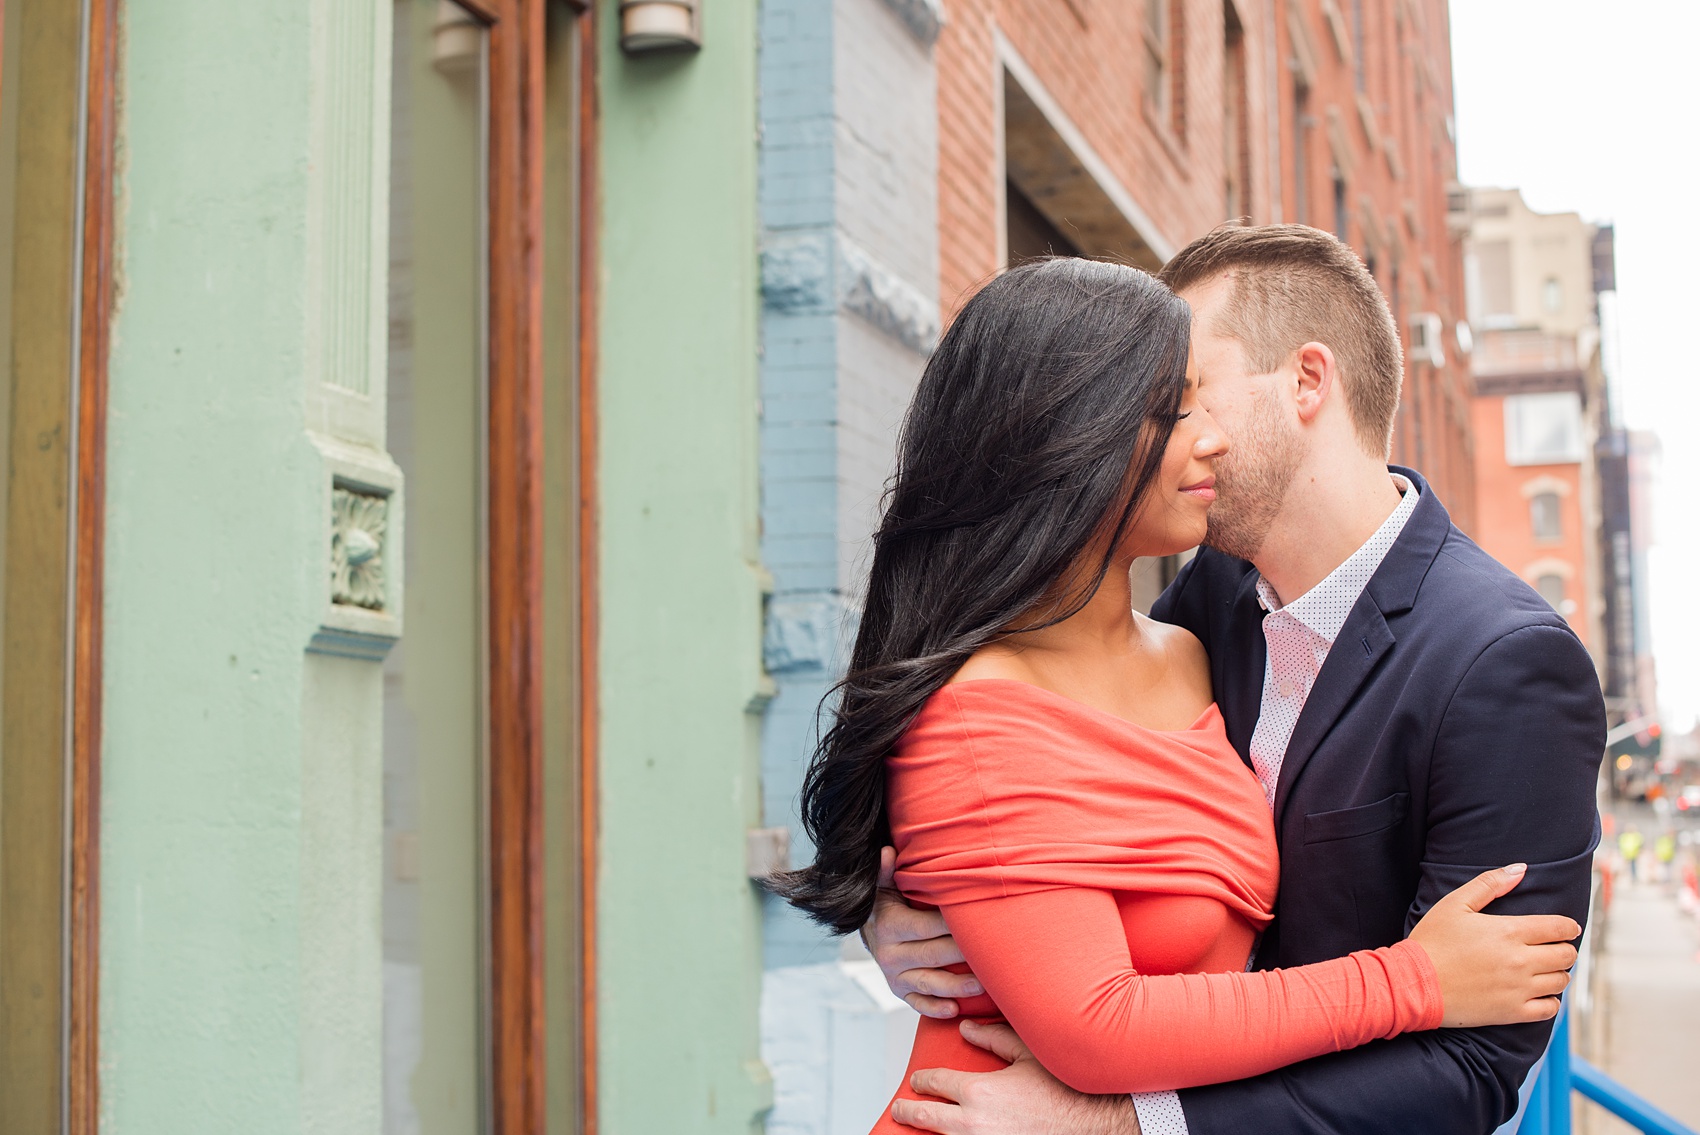 Mikkel Paige Photography pictures of an engagement session in Tribeca. A photo of the couple with lower Manhattan architecture.